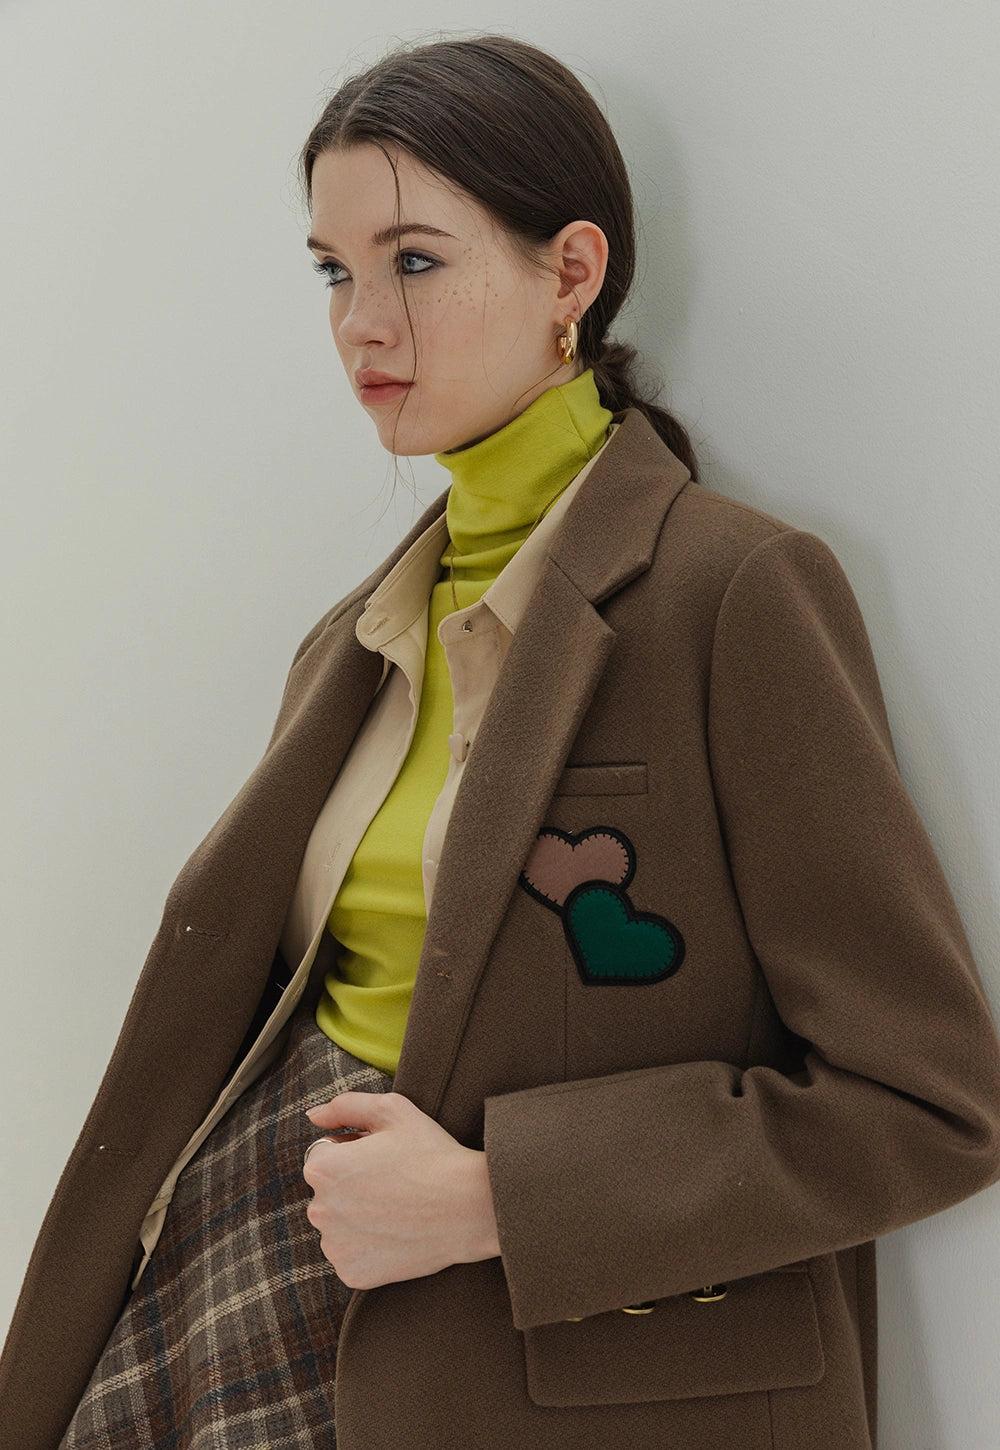 Women's Brown Jacket with Heart Patch and Front Pockets